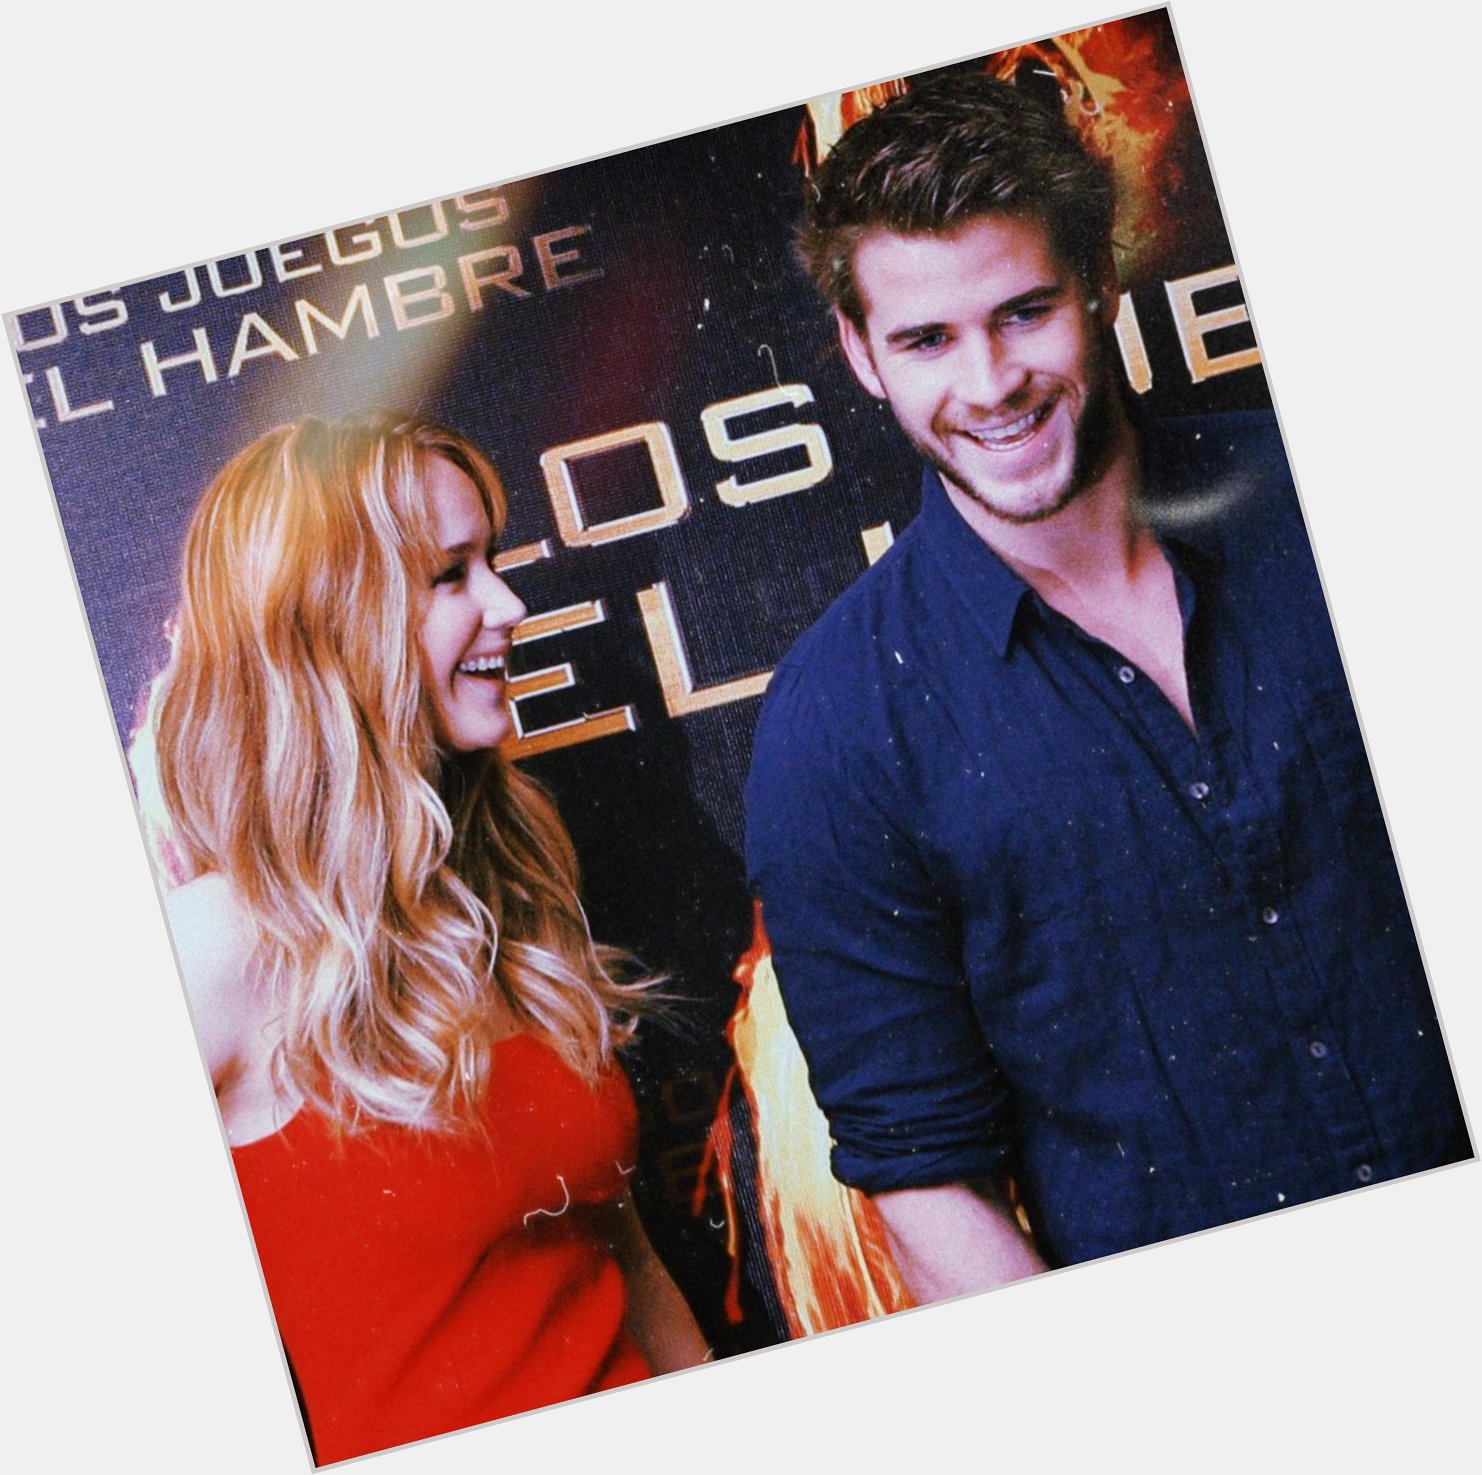 Happy Birthday Liam Hemsworth  I miss these two so much 